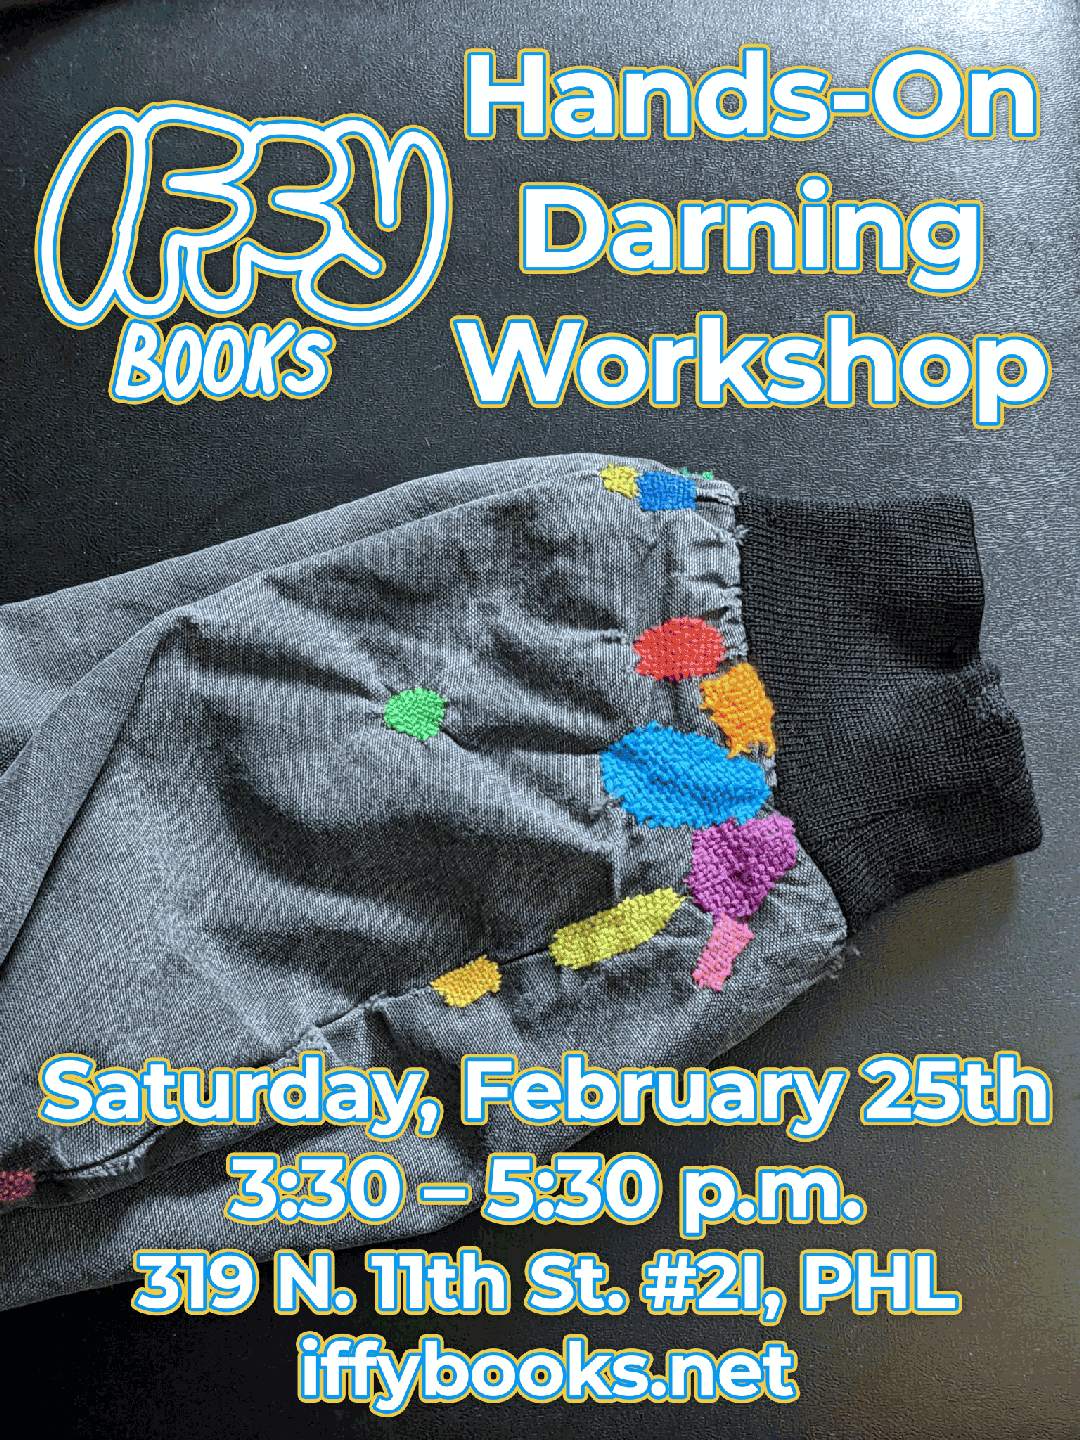 Flyer with a photo of a jacket sleeve, with about a dozen darned repairs done with colorful thread. The text reads as follows: Iffy Books Hands-On Darning Workshop Saturday, February 25th 3:30 – 5:30 p.m. 319 N. 11th St. #2I, PHL iffybooks.net